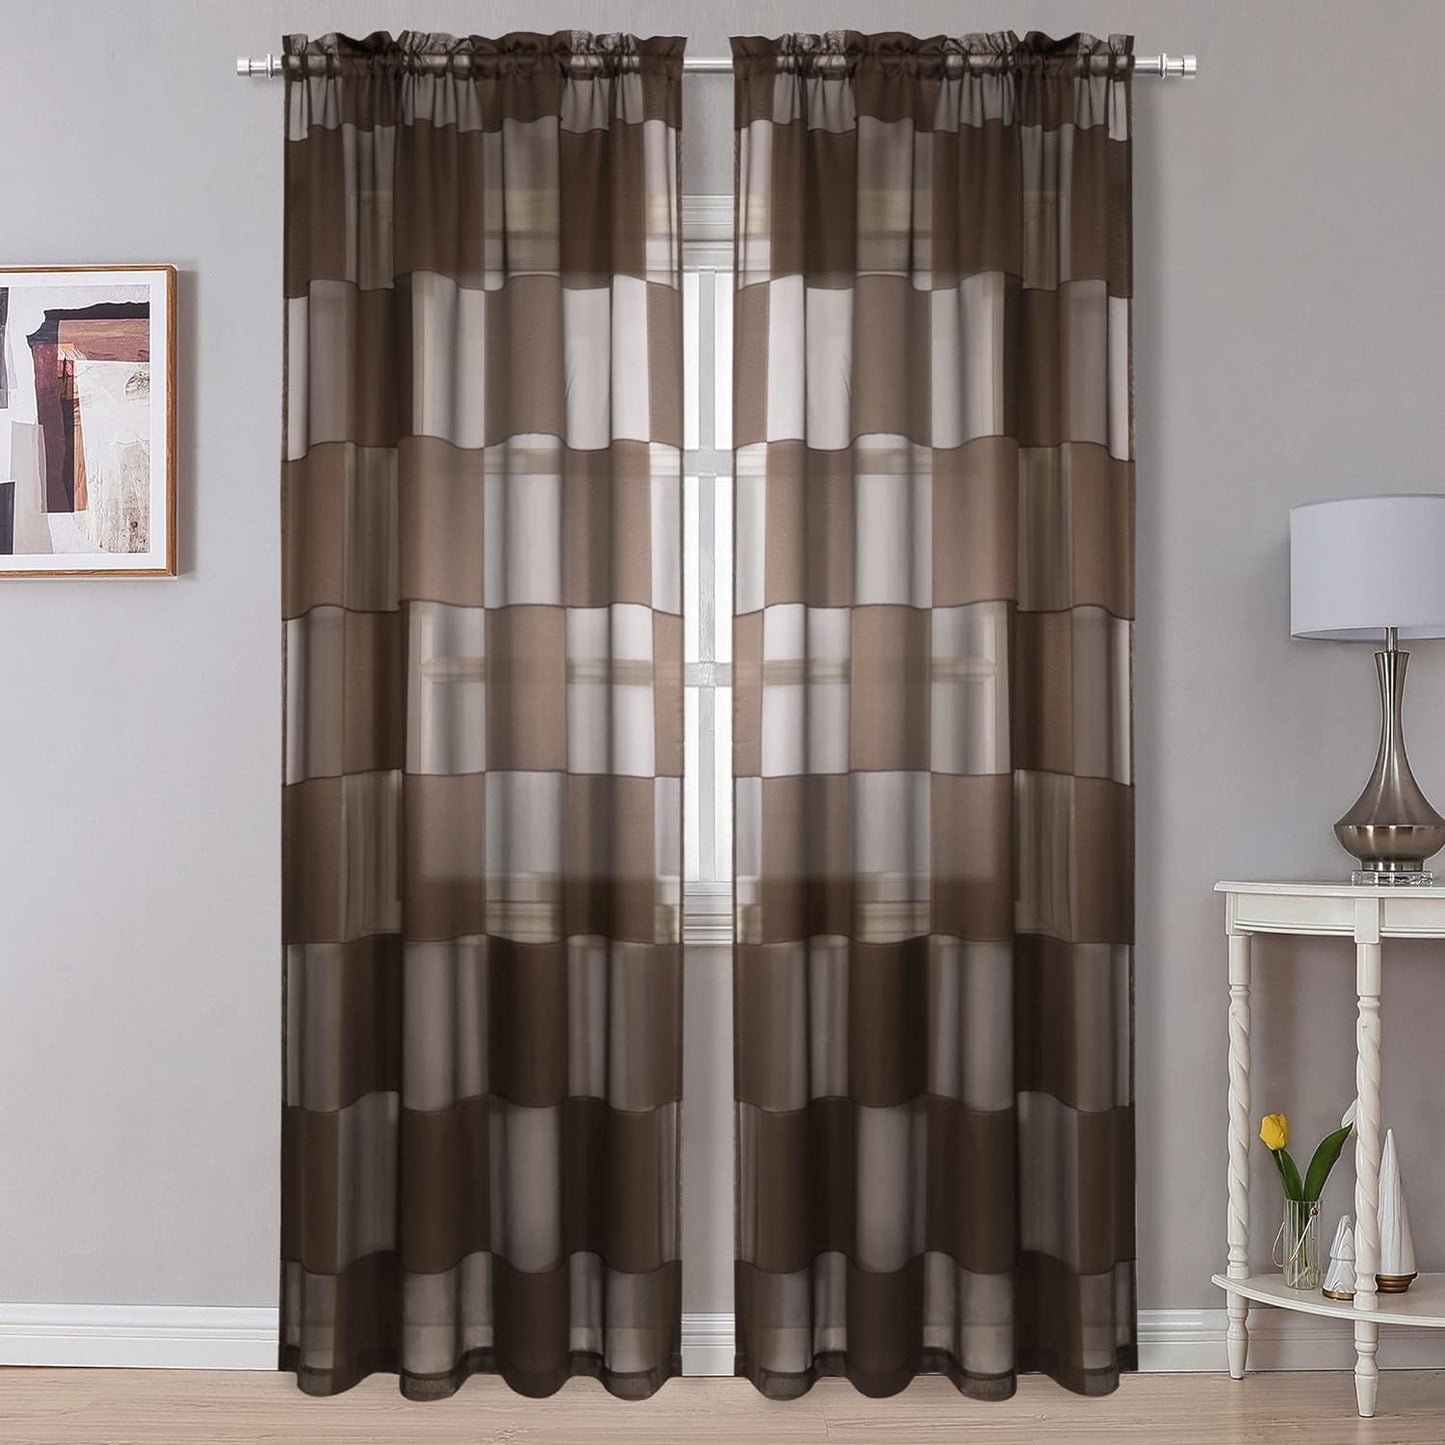 OVZME Sage Green Sheer Bedroom Curtains 84 Inch Length 2 Panels Set, Dual Rod Pocket Clip Checkered Window Curtains for Living Room, Light Filtering & Privacy Sheer Green Drapes, Each 42W X 84L  OVZME Brown 42W X 96L 